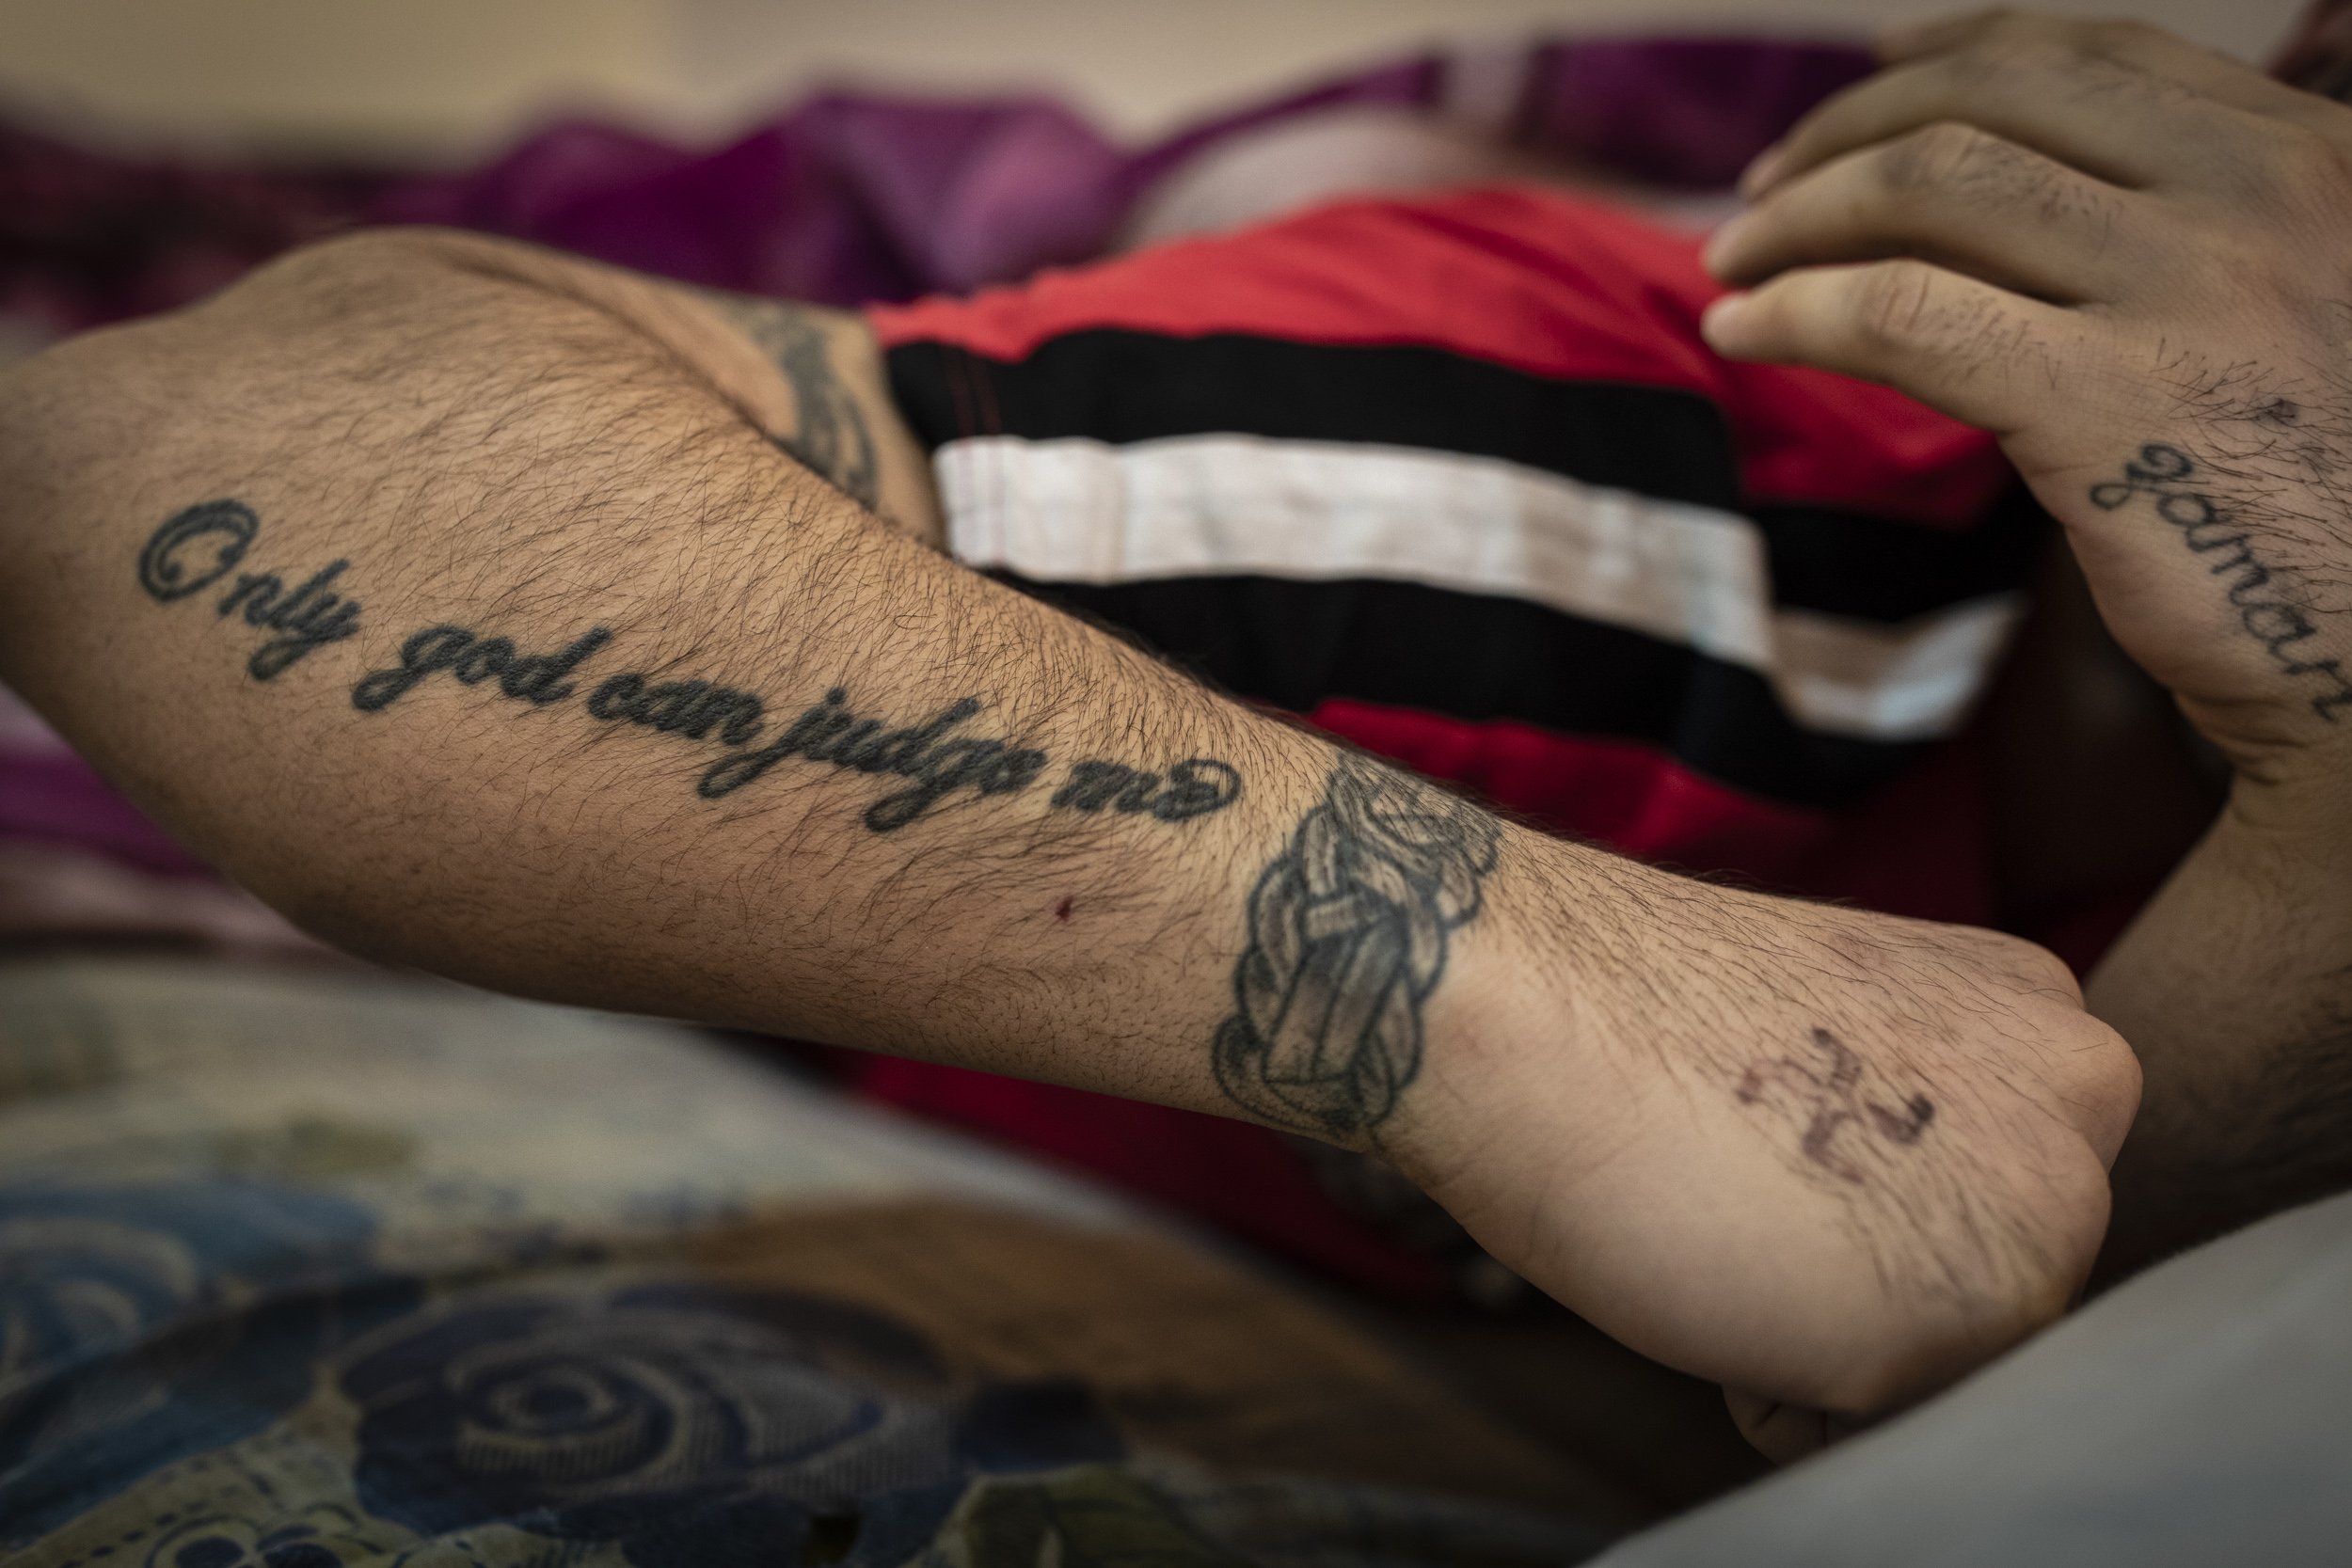  Inmates showed off their tattoos at a special rehabilitation prison for convicted drug addicts and dealers who were arrested in operations targeting the illegal drug trade in southern Iraq.  